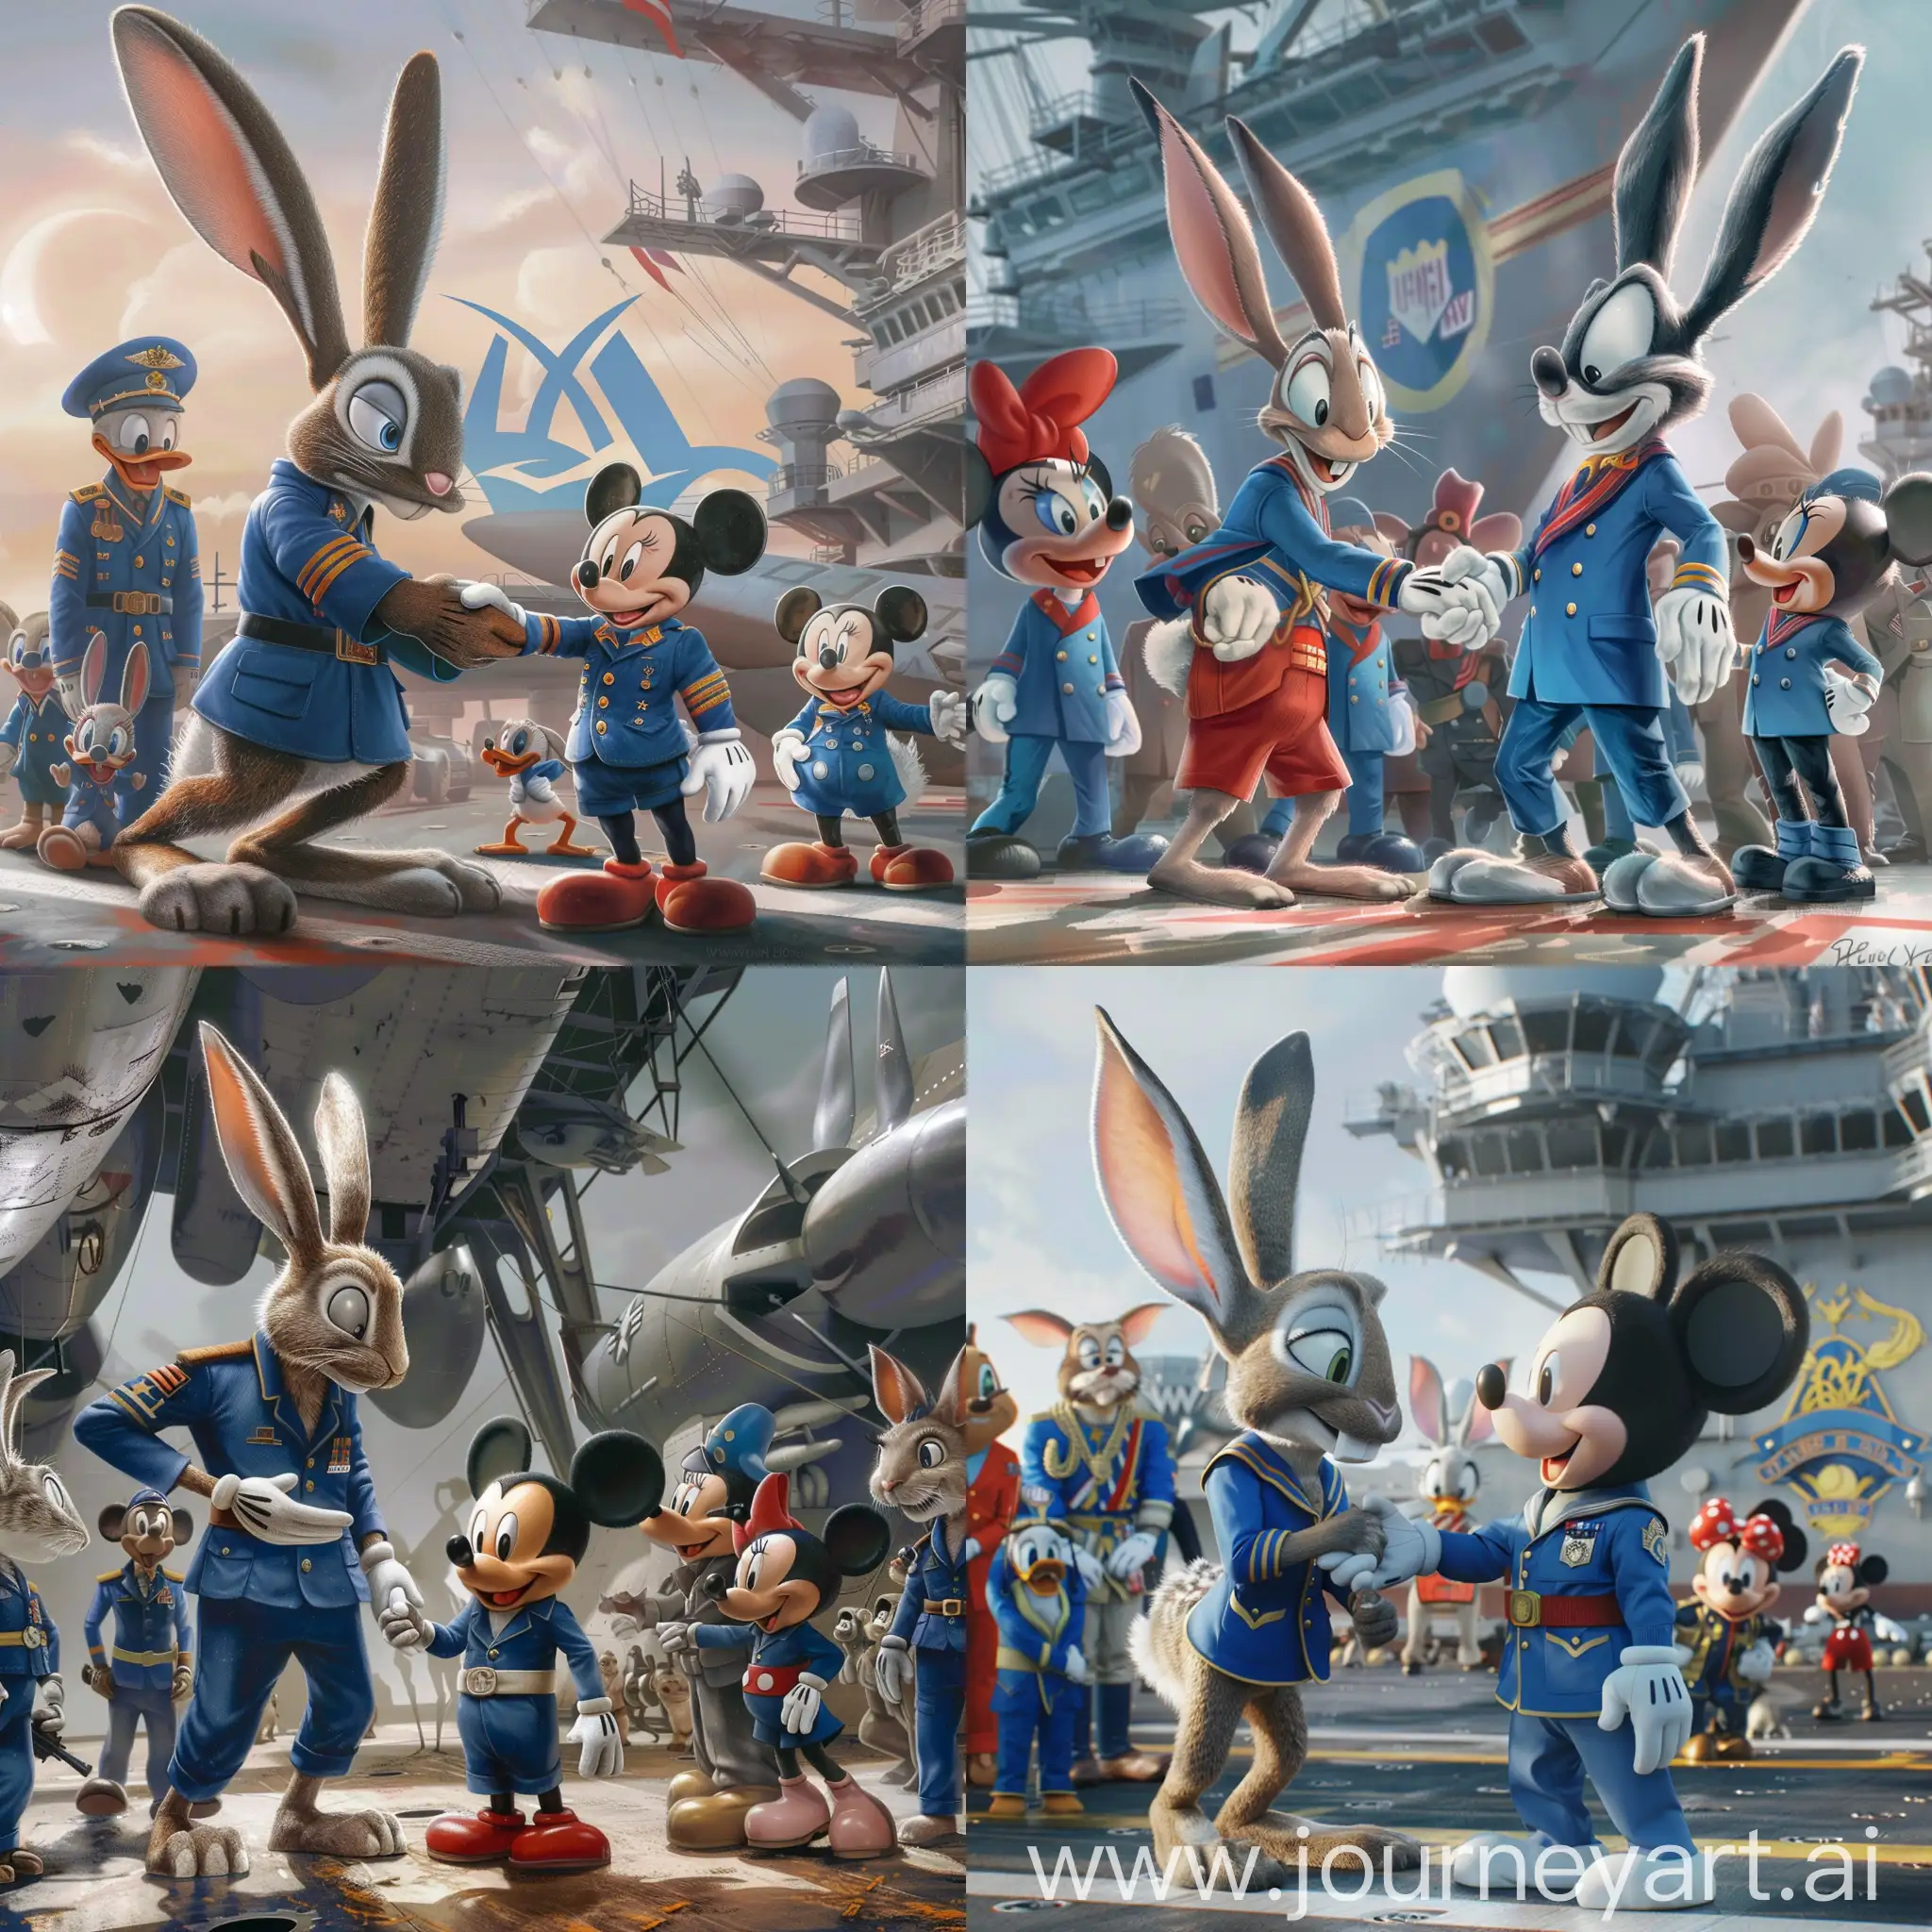 Adorable-Alliance-Bugs-Bunny-and-Mickey-Mouse-on-a-US-Aircraft-Carrier